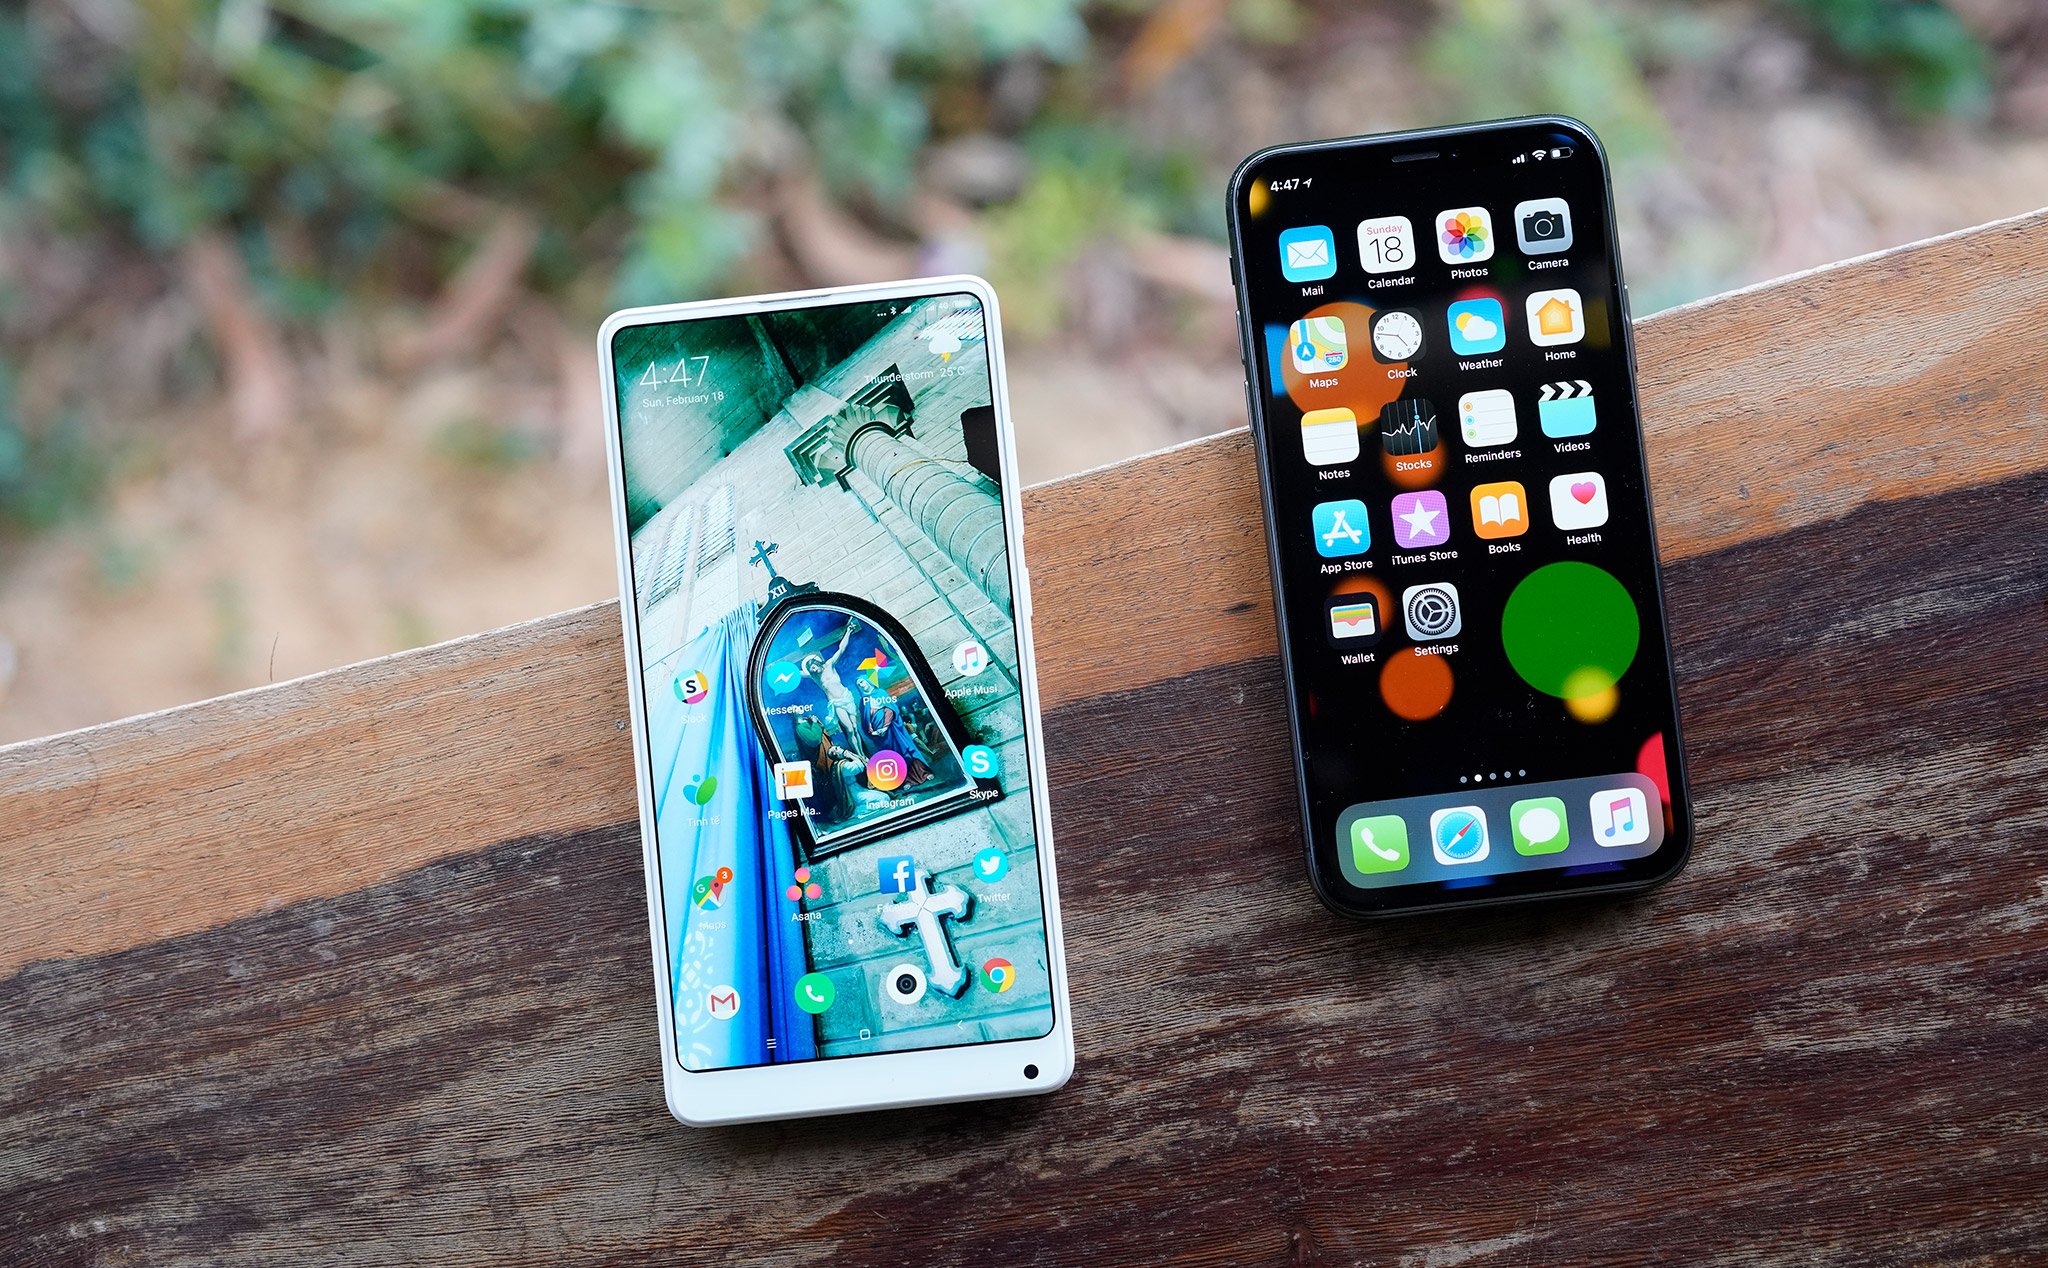 Anh em dùng iPhone, Android hay cả hai?